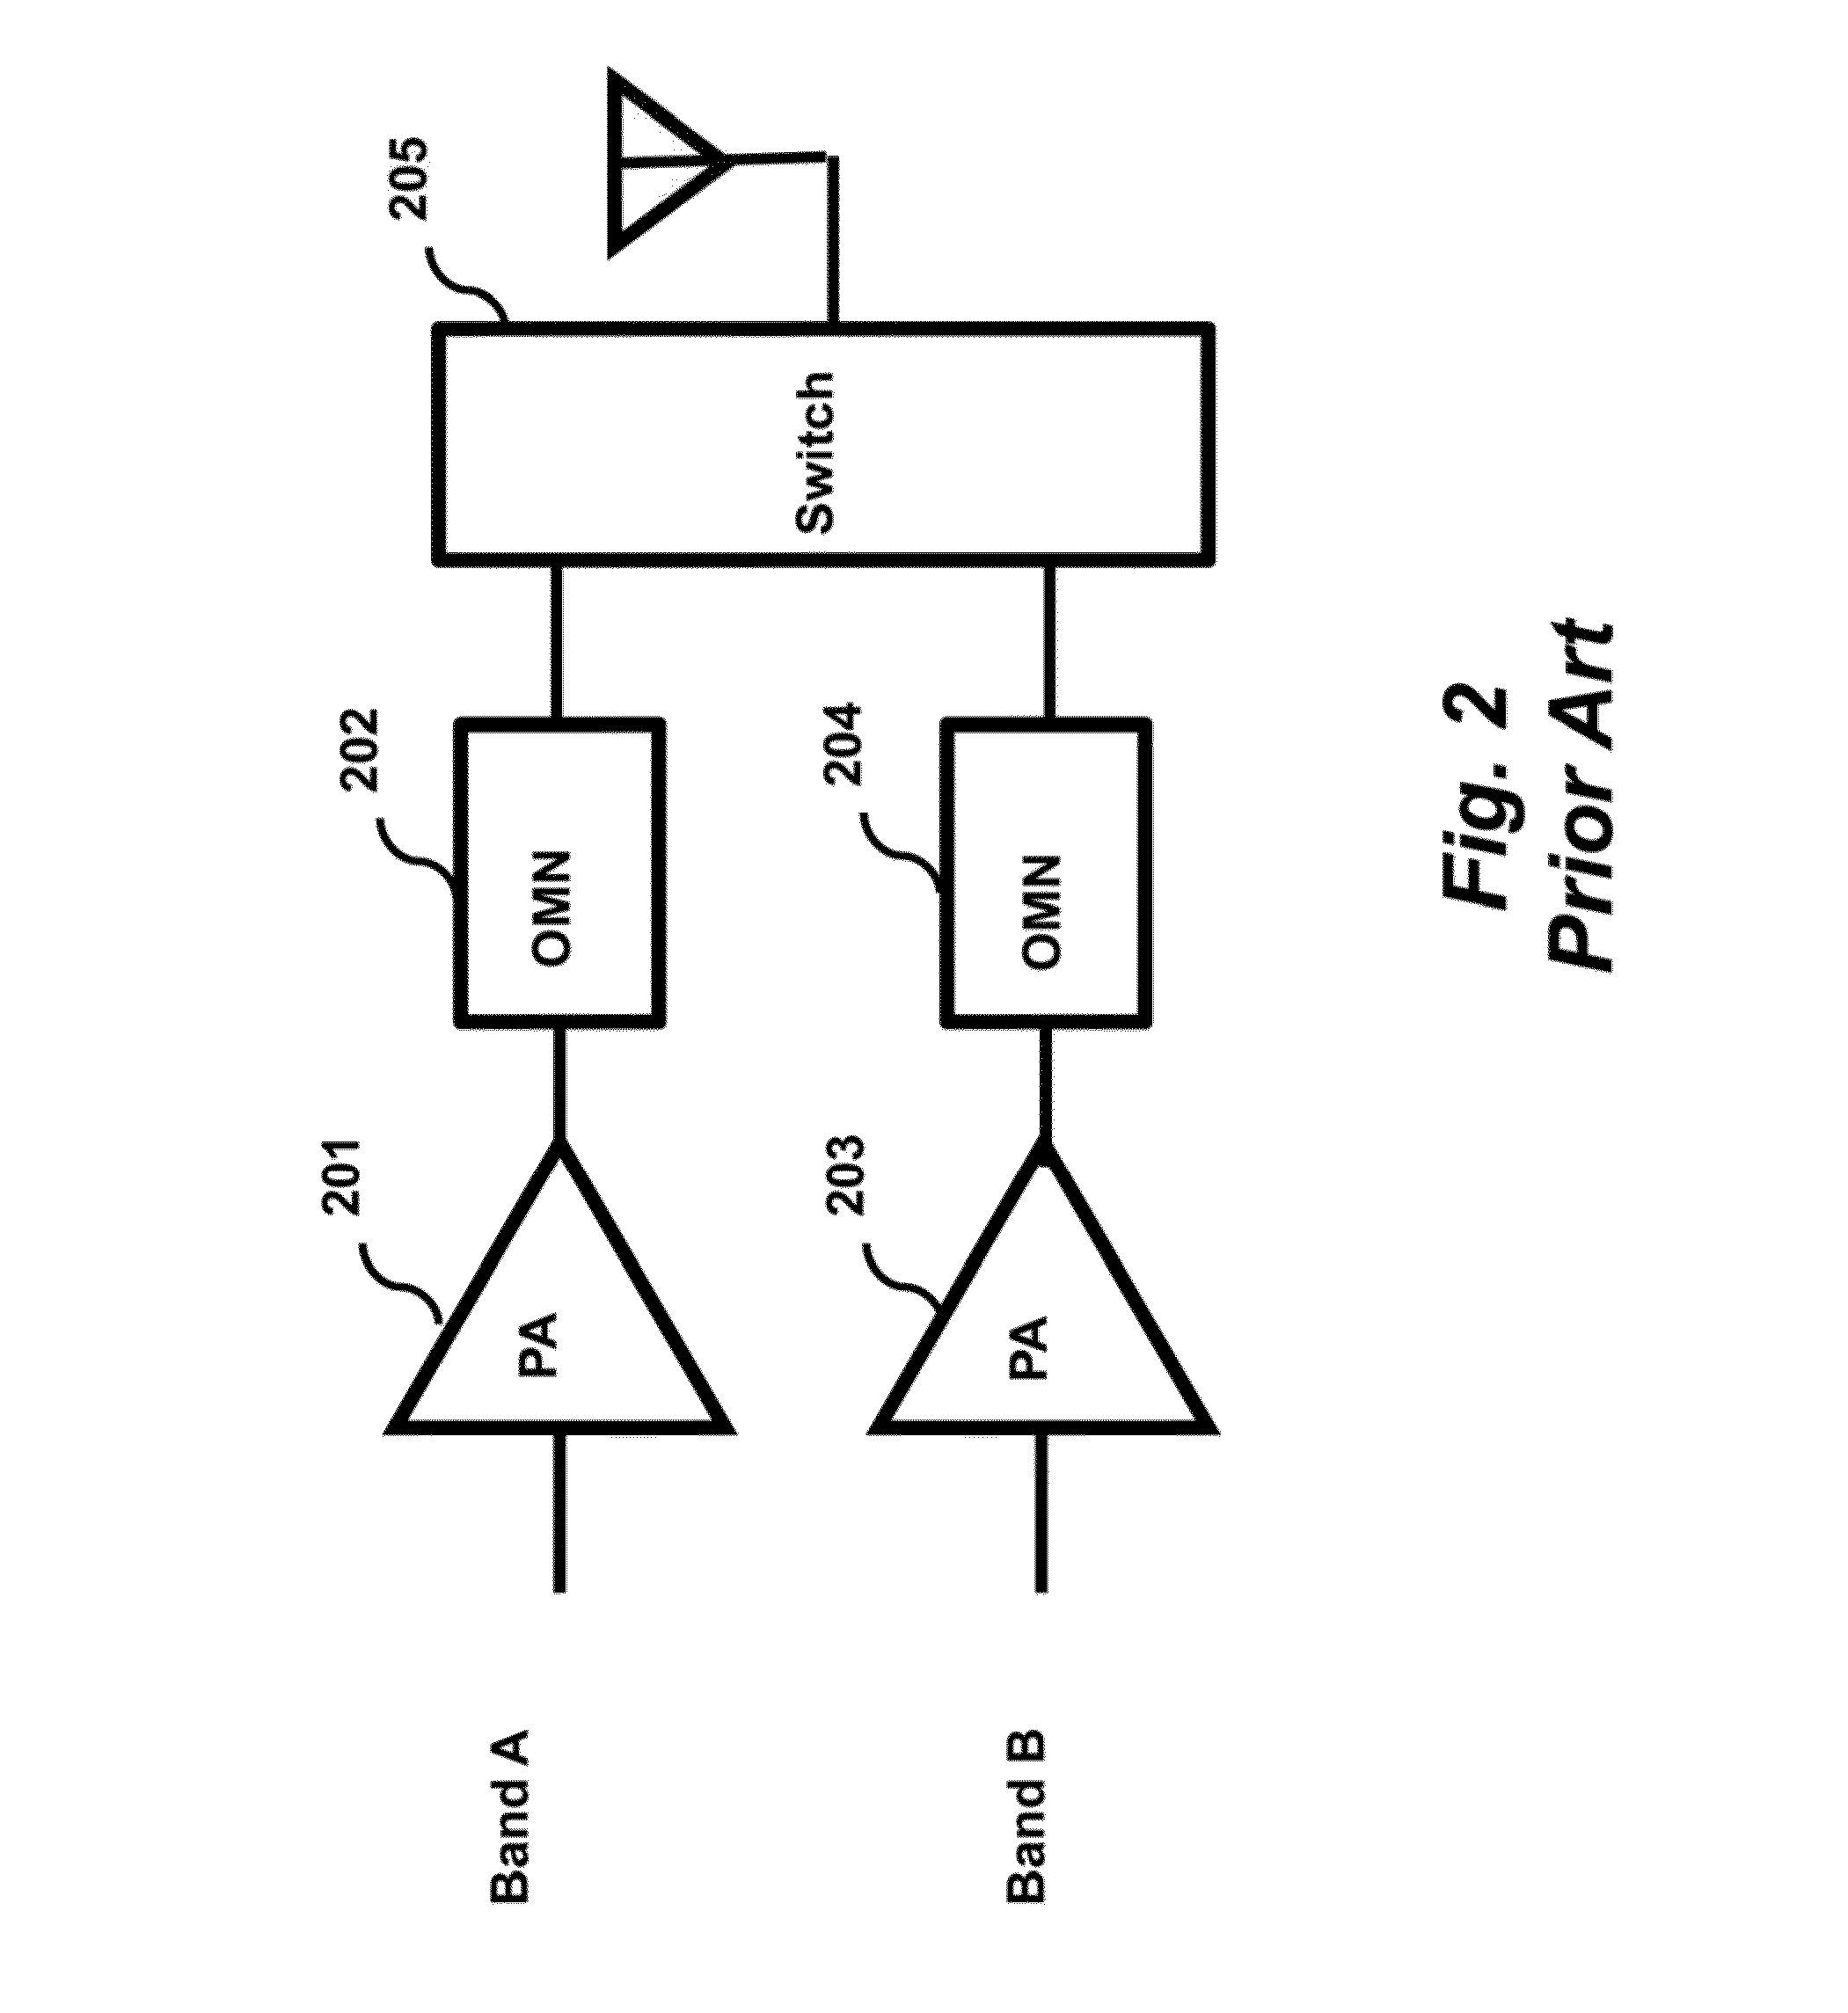 Output Matching Network for Wideband Power Amplifier with Harmonic Suppression